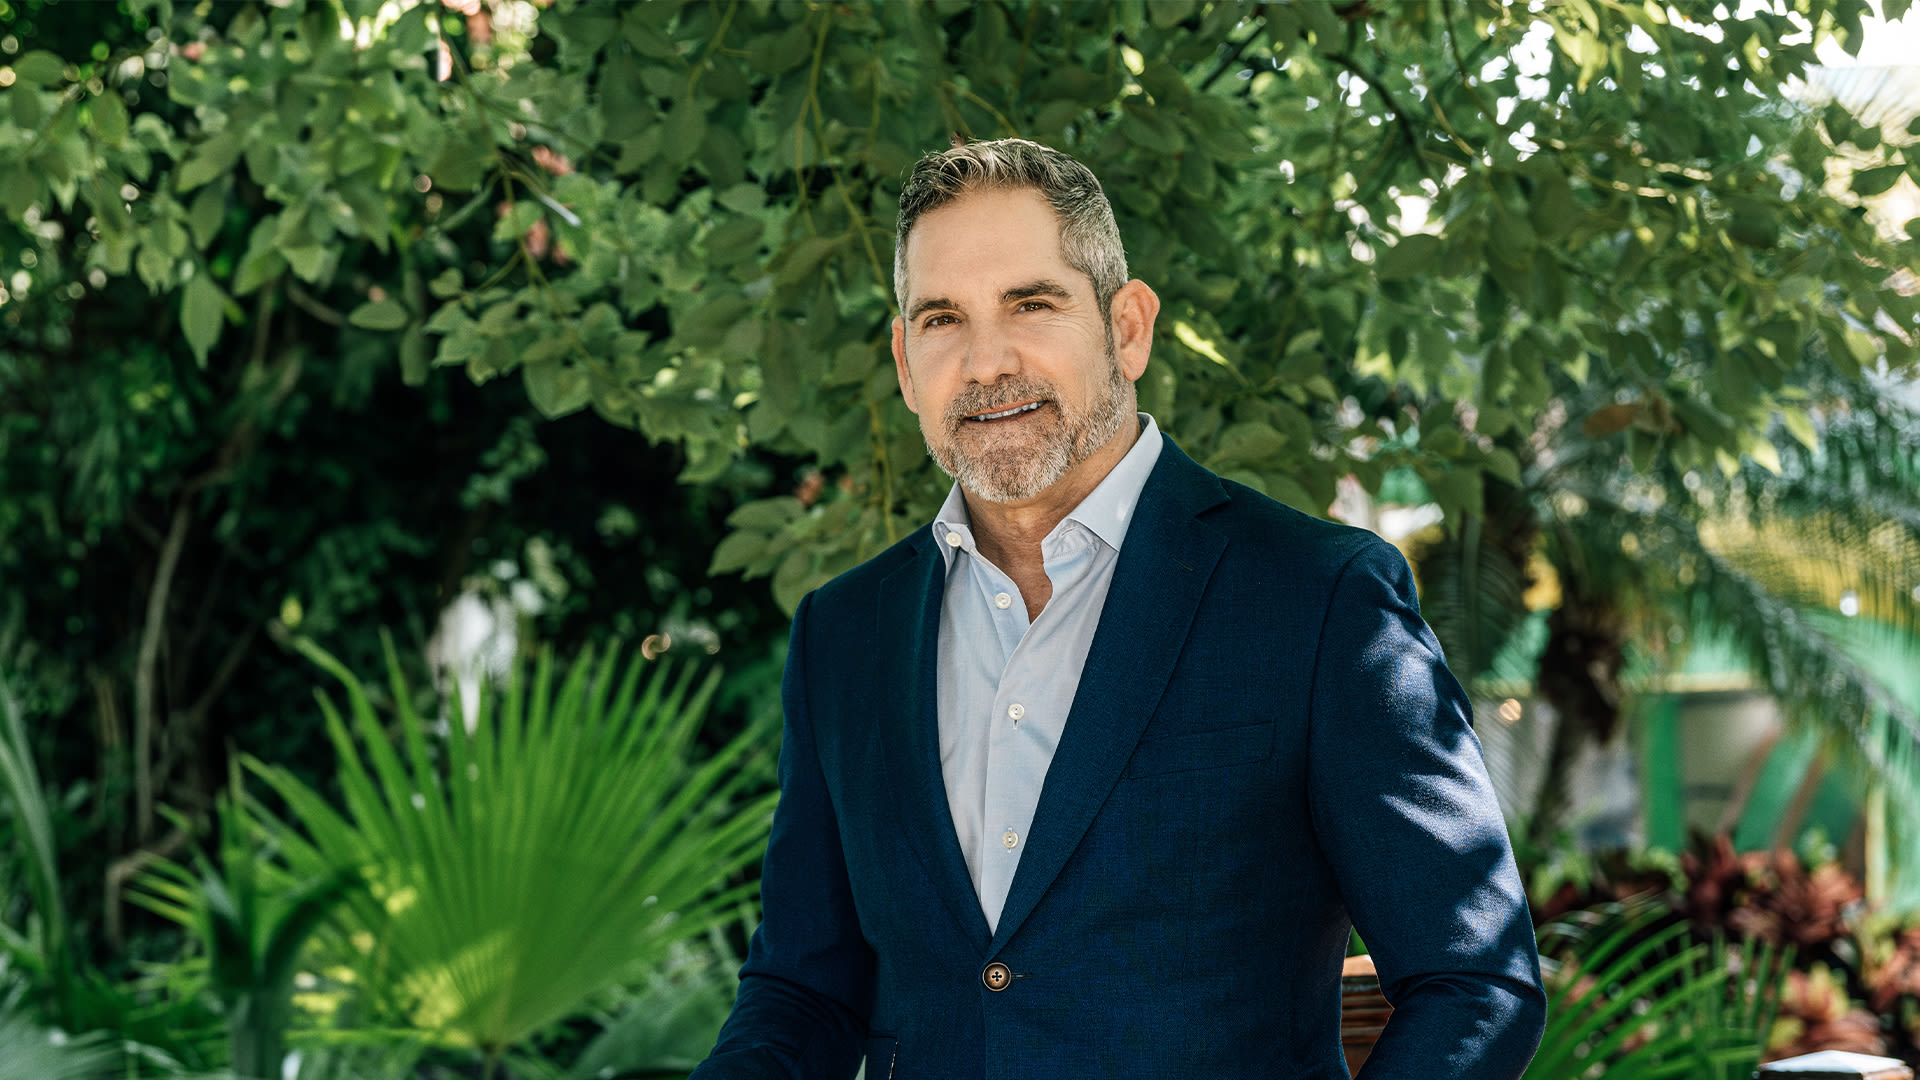 Grant Cardone: Here’s Why I Predict the New Social Security Retirement Age Will Be 73